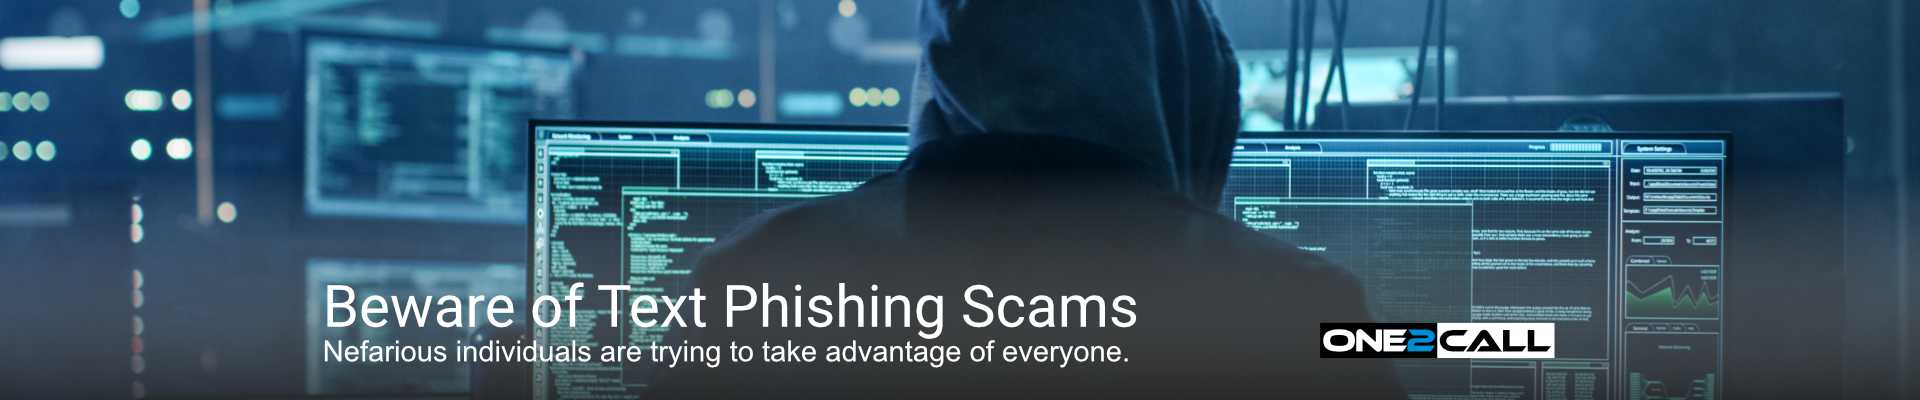 Beware of Text Phishing Scams